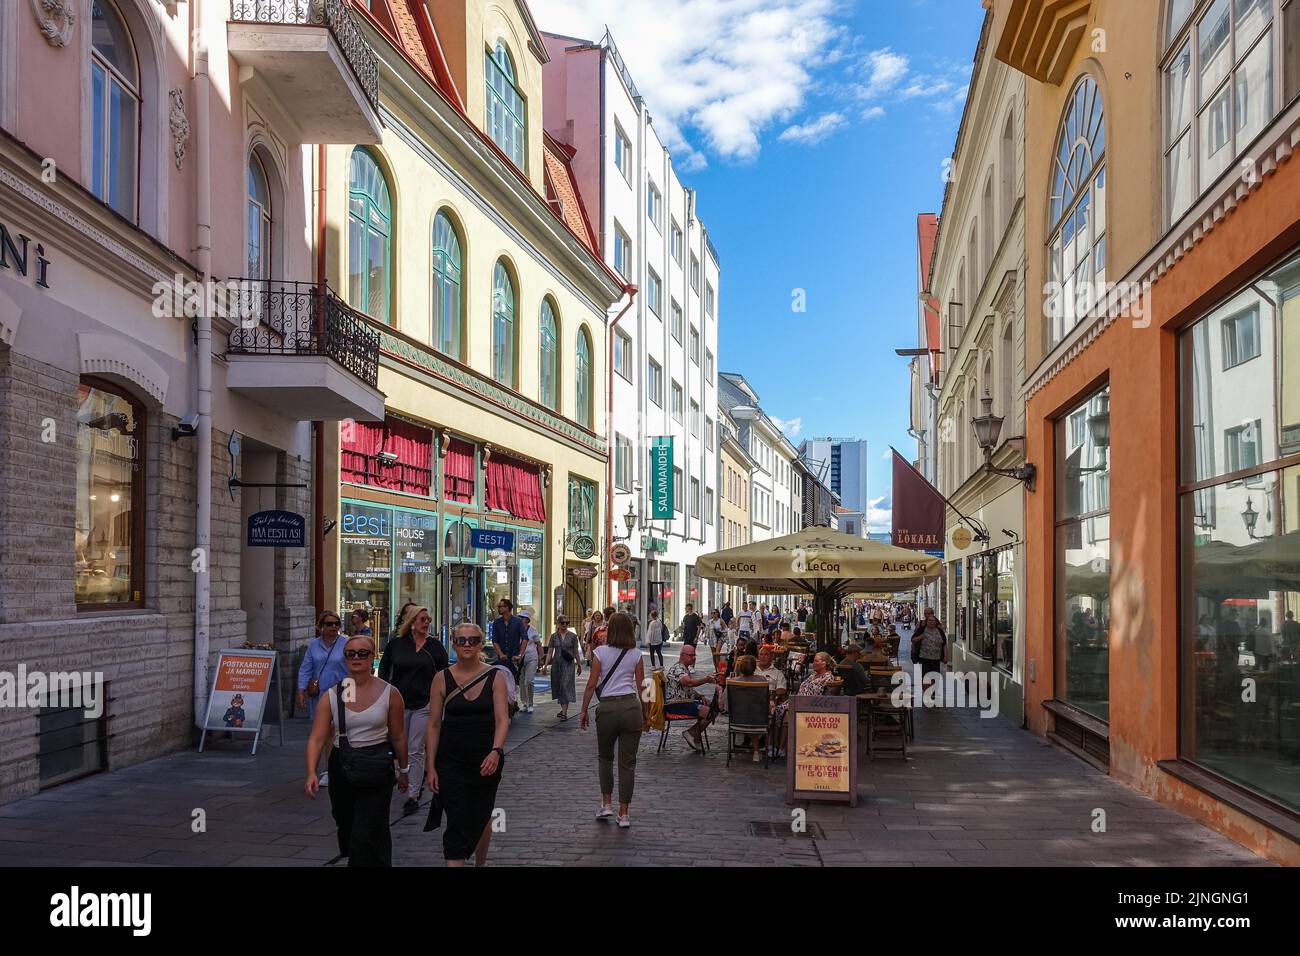 Tallinn, Estonia 31 July 2022  General view of the old town streets with not so many touritst visiting the city is seen in Tallinn, Estonia on 31 July 2022 Credit: Vadim Pacajev/Alamy Live News Stock Photo